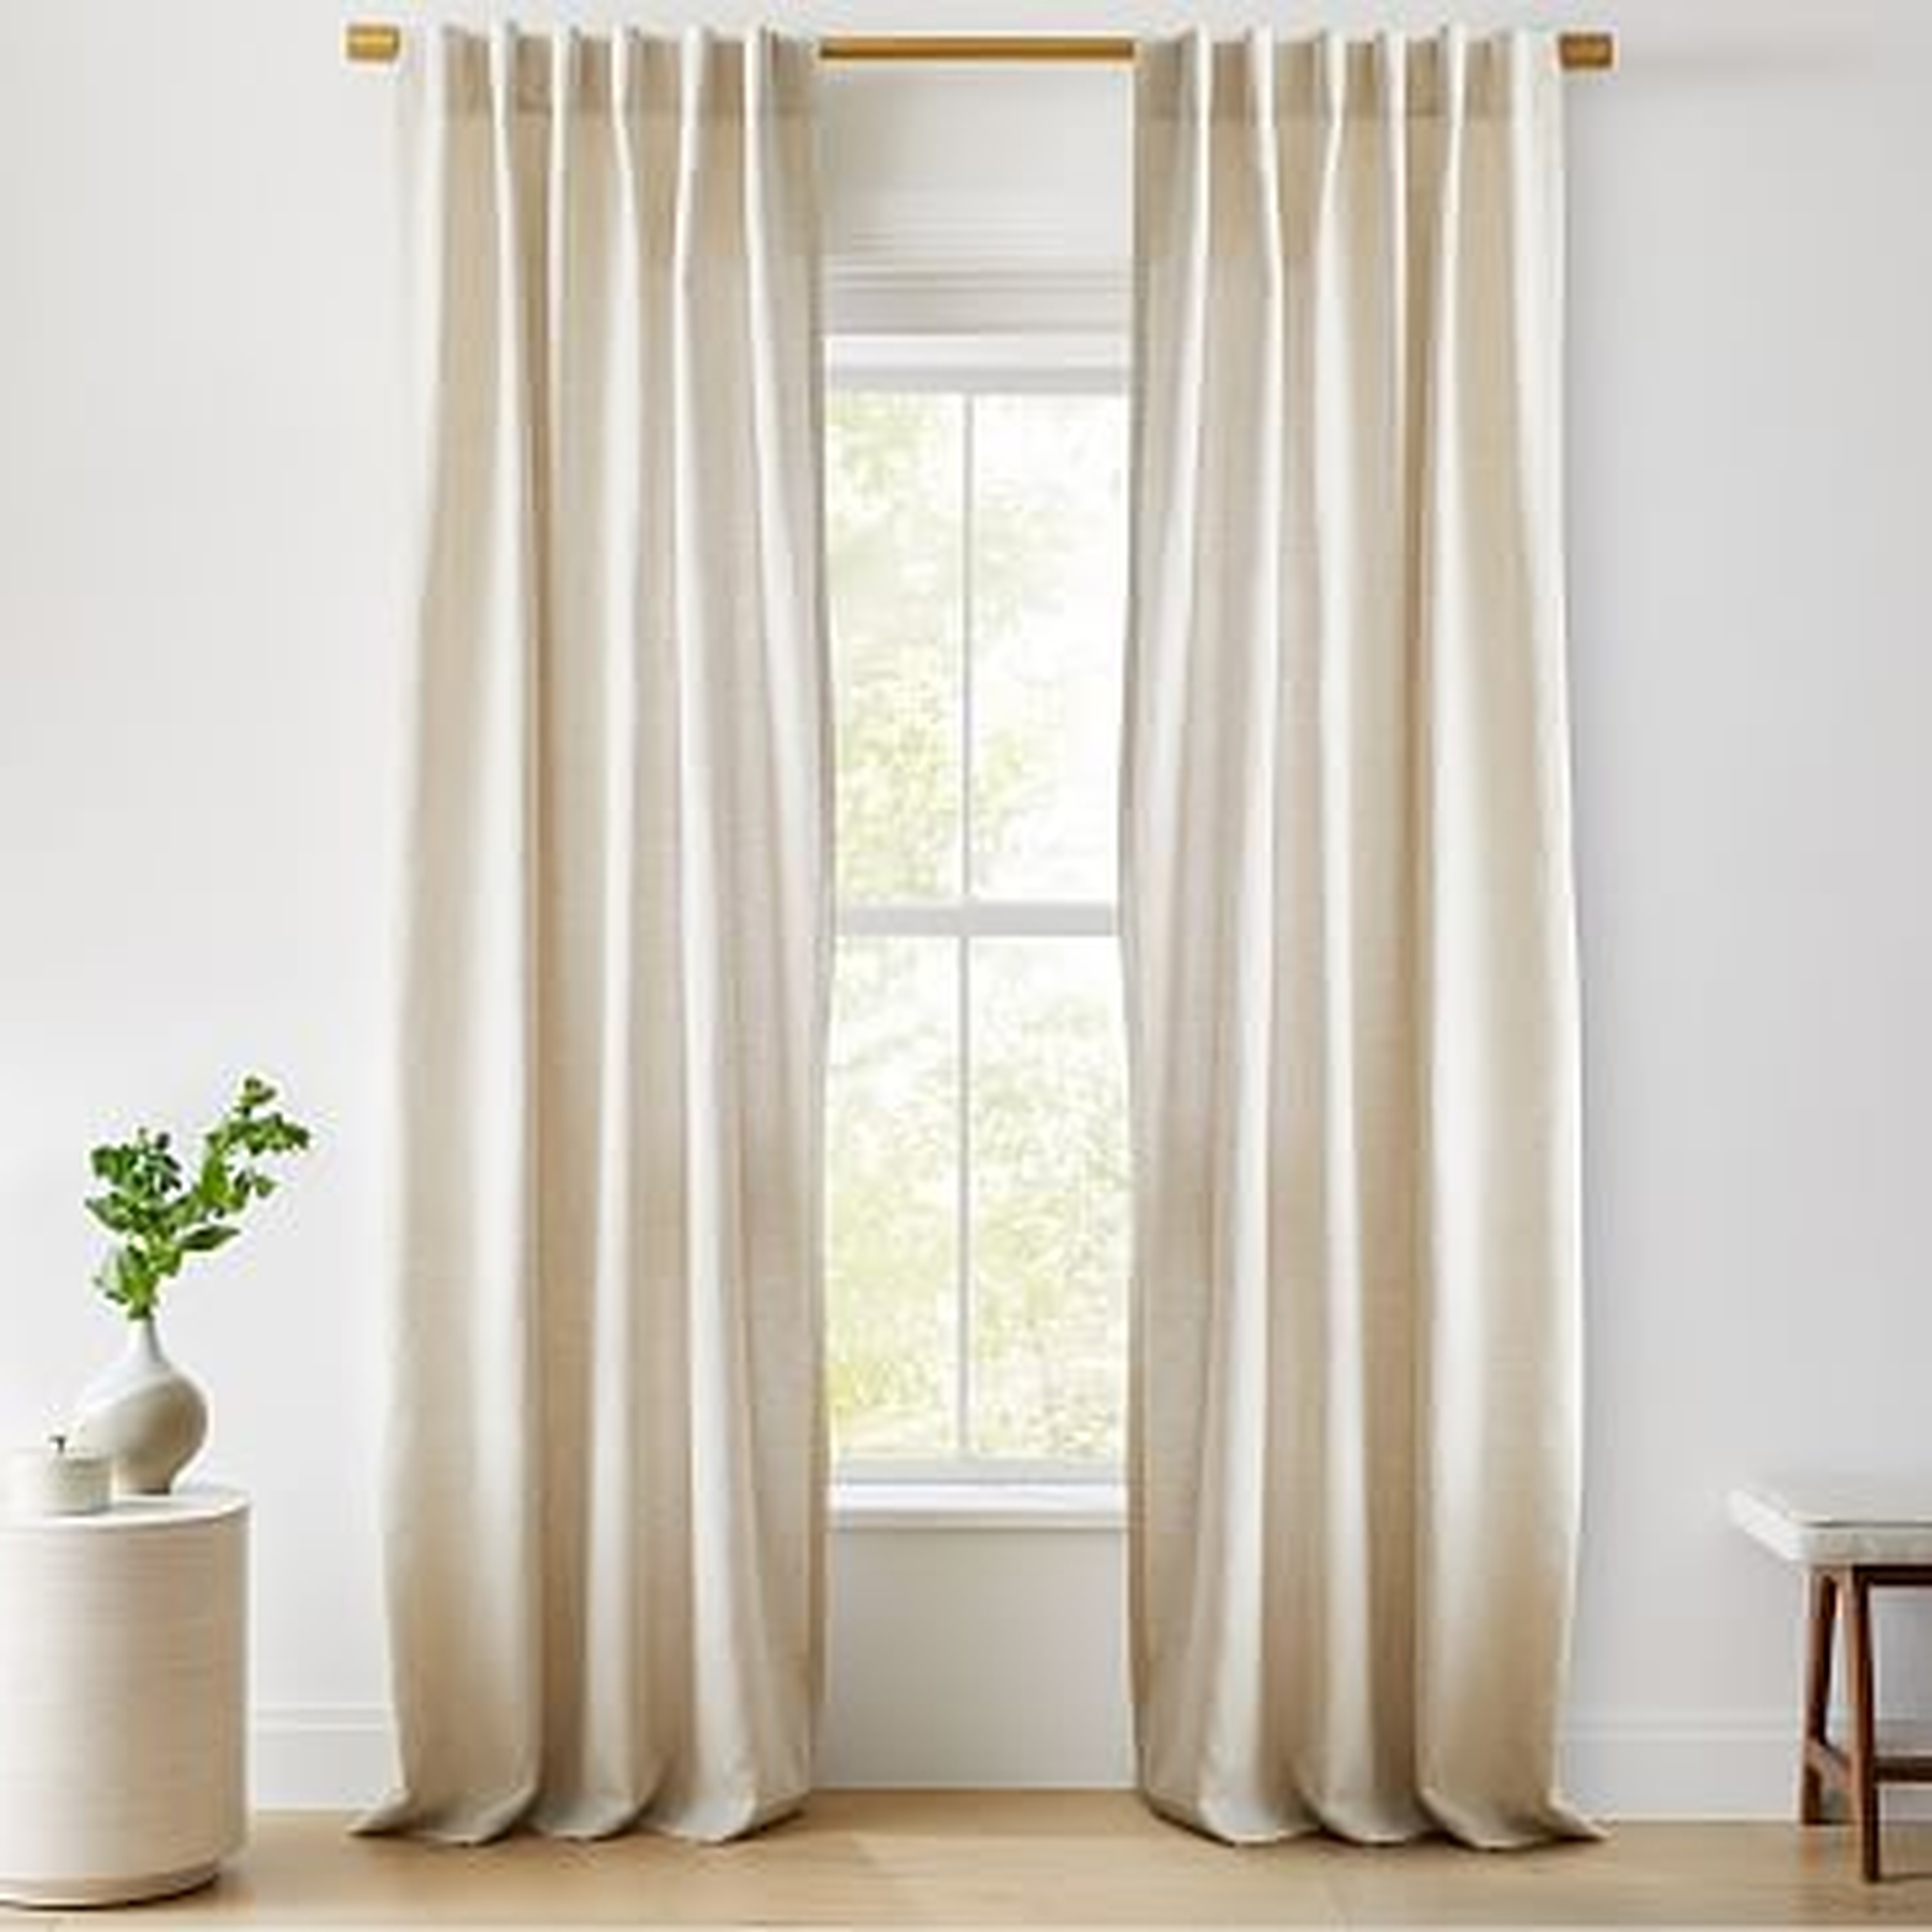 European Flax Linen Curtain with Cotton Lining, Natural, 48"x84", Set of 2 - West Elm